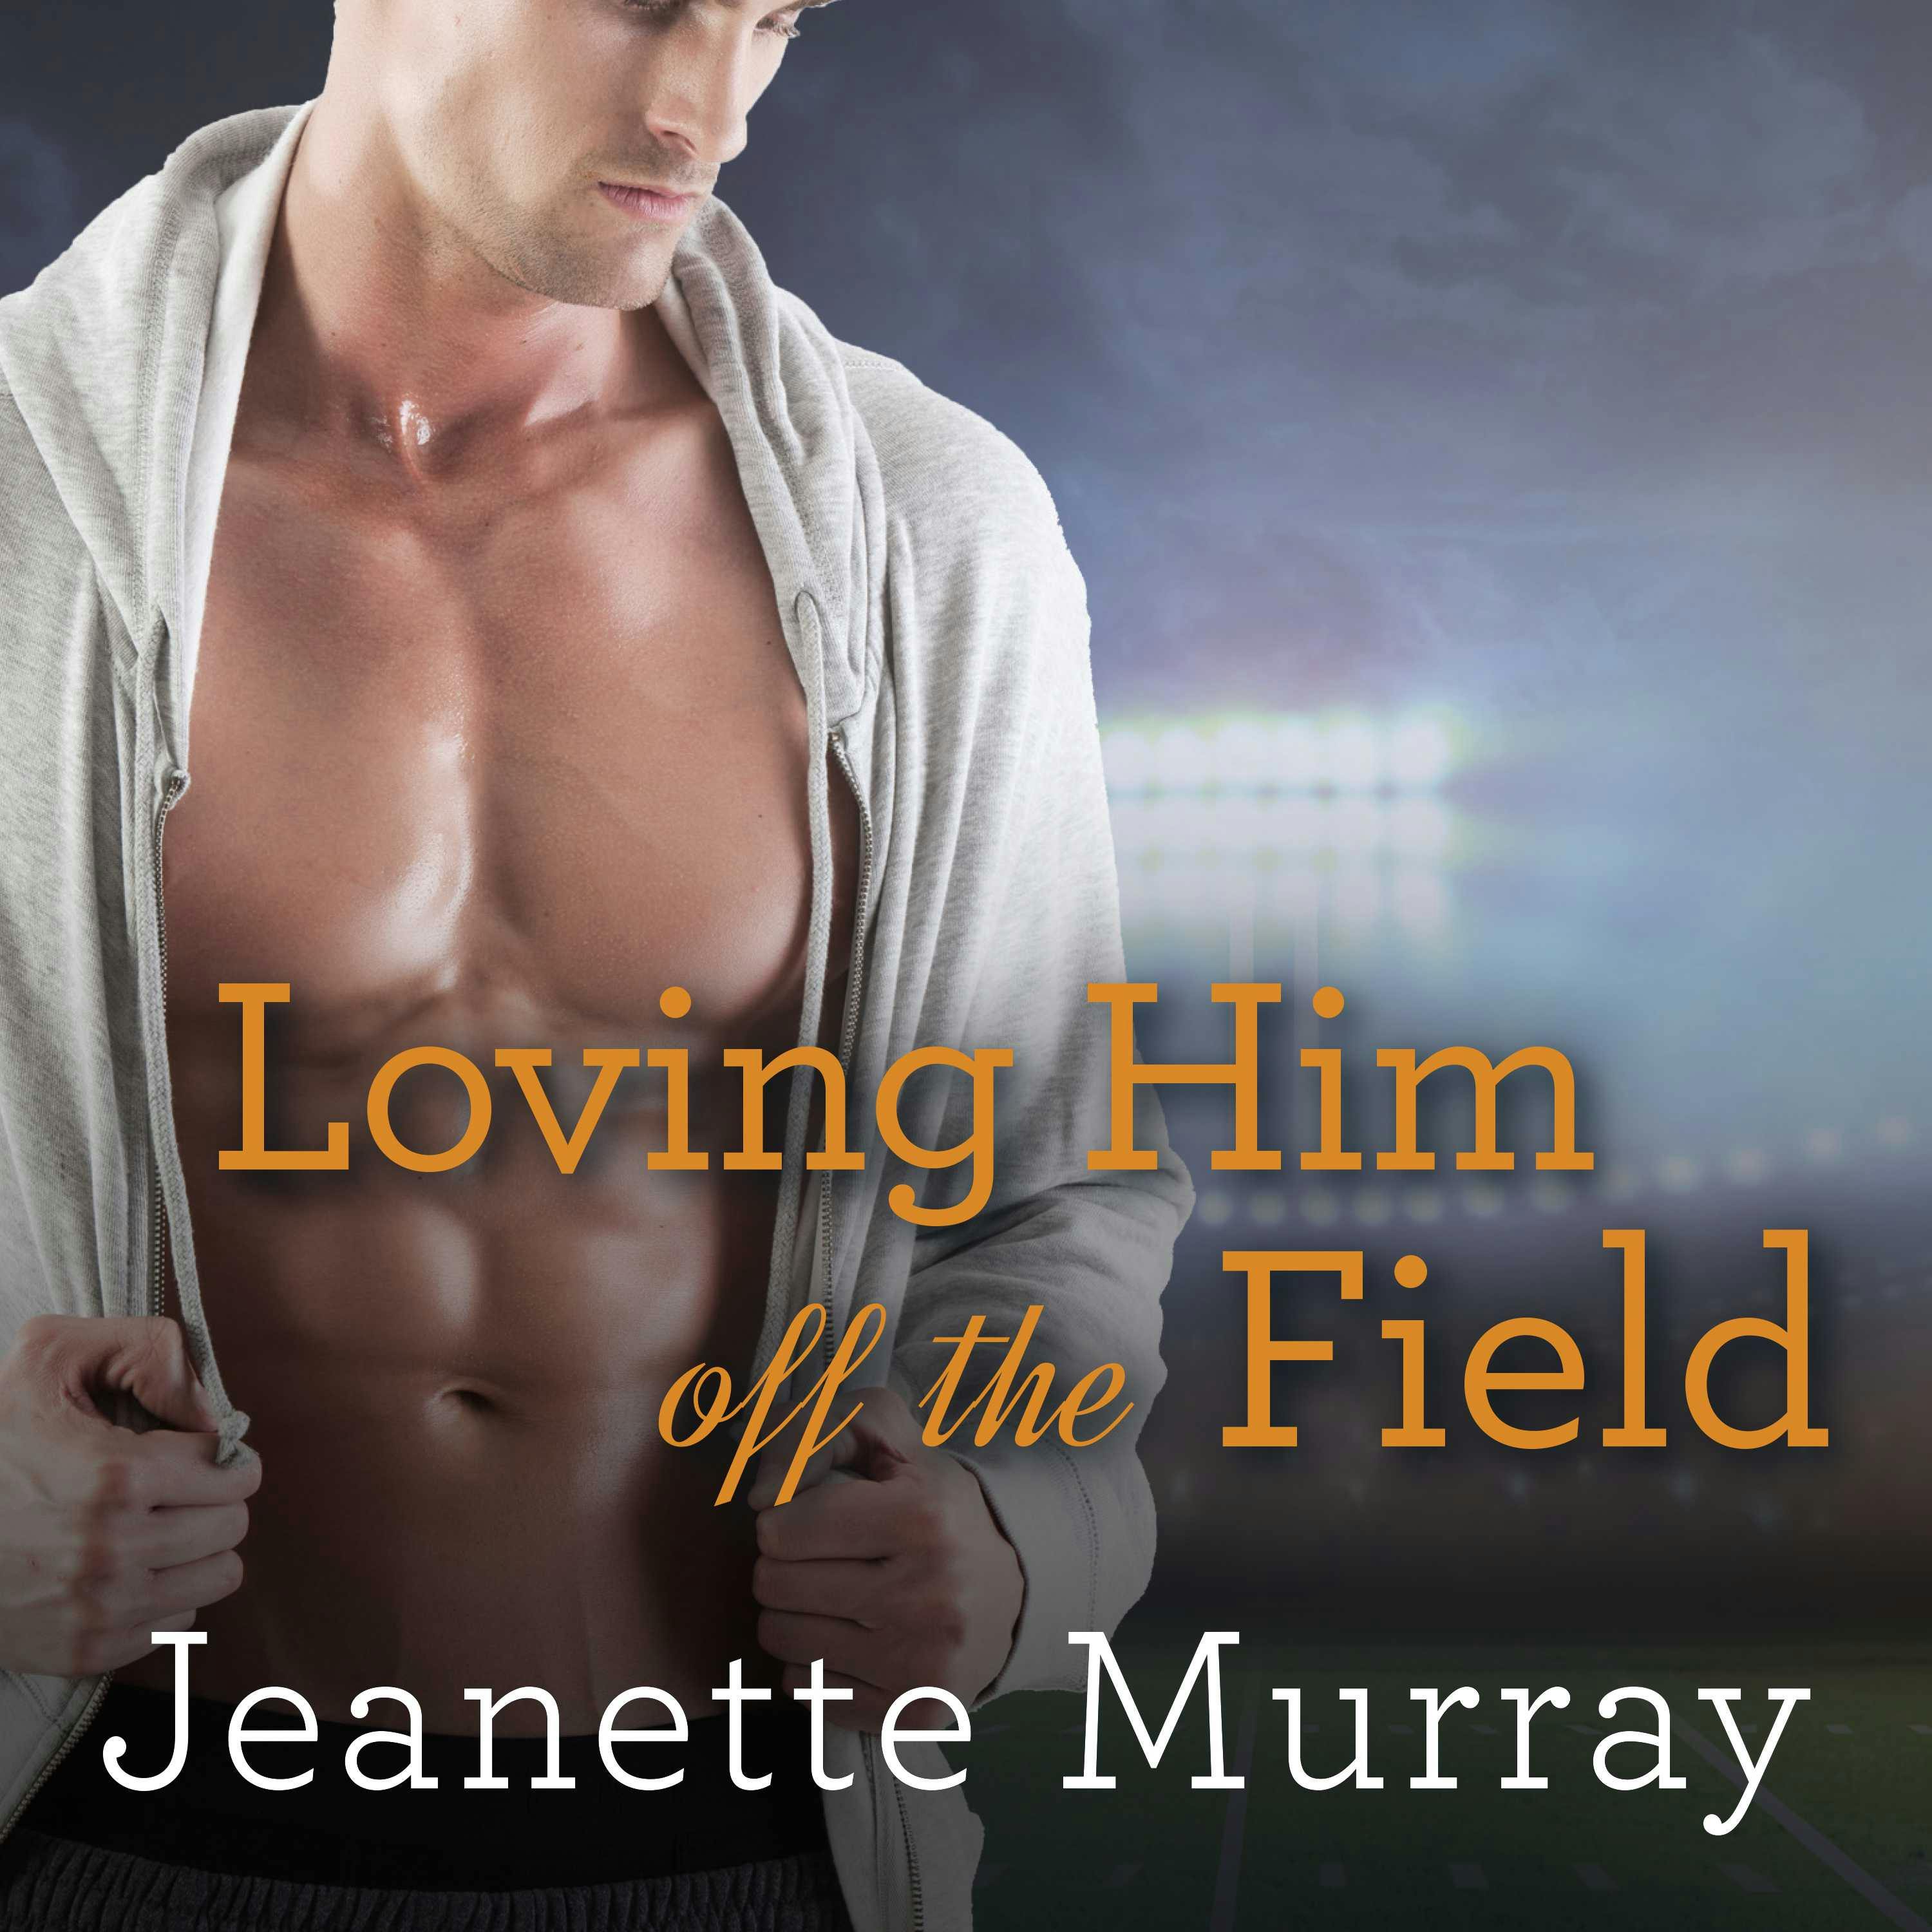 Loving Him Off the Field - Jeanette Murray